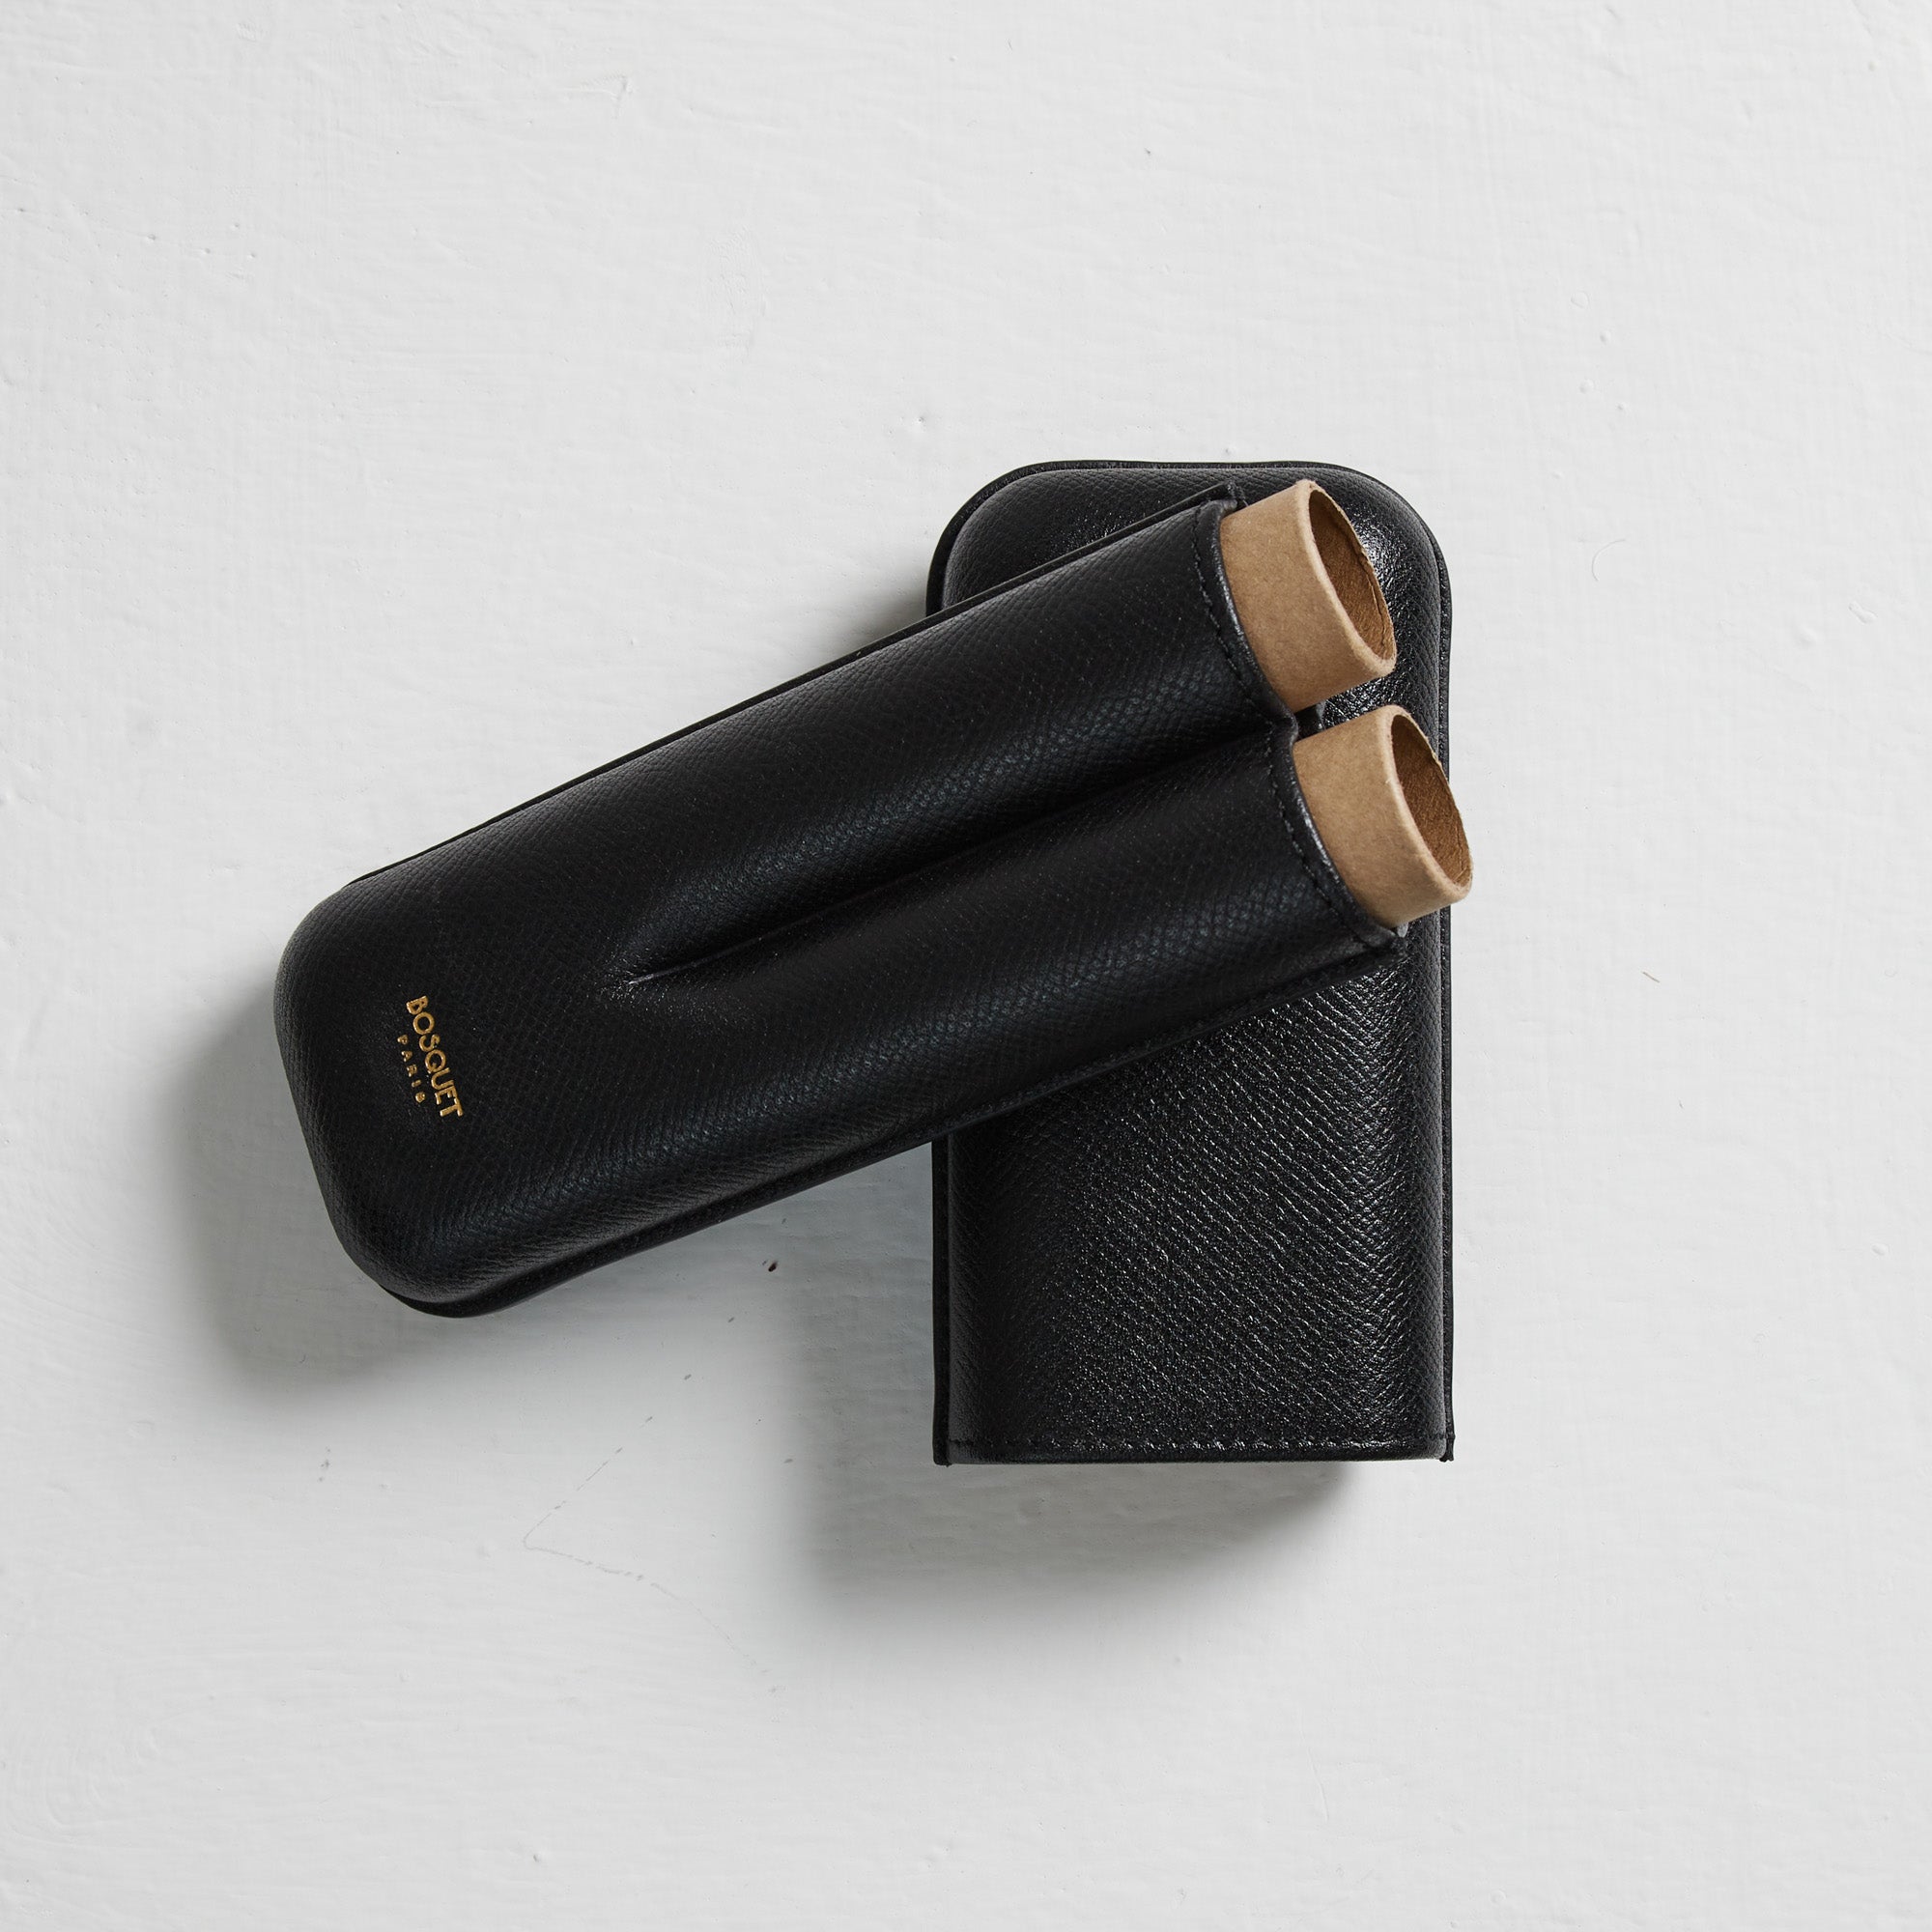 Two Bosque Smooth Black Leather Cigar Cases on a white surface.